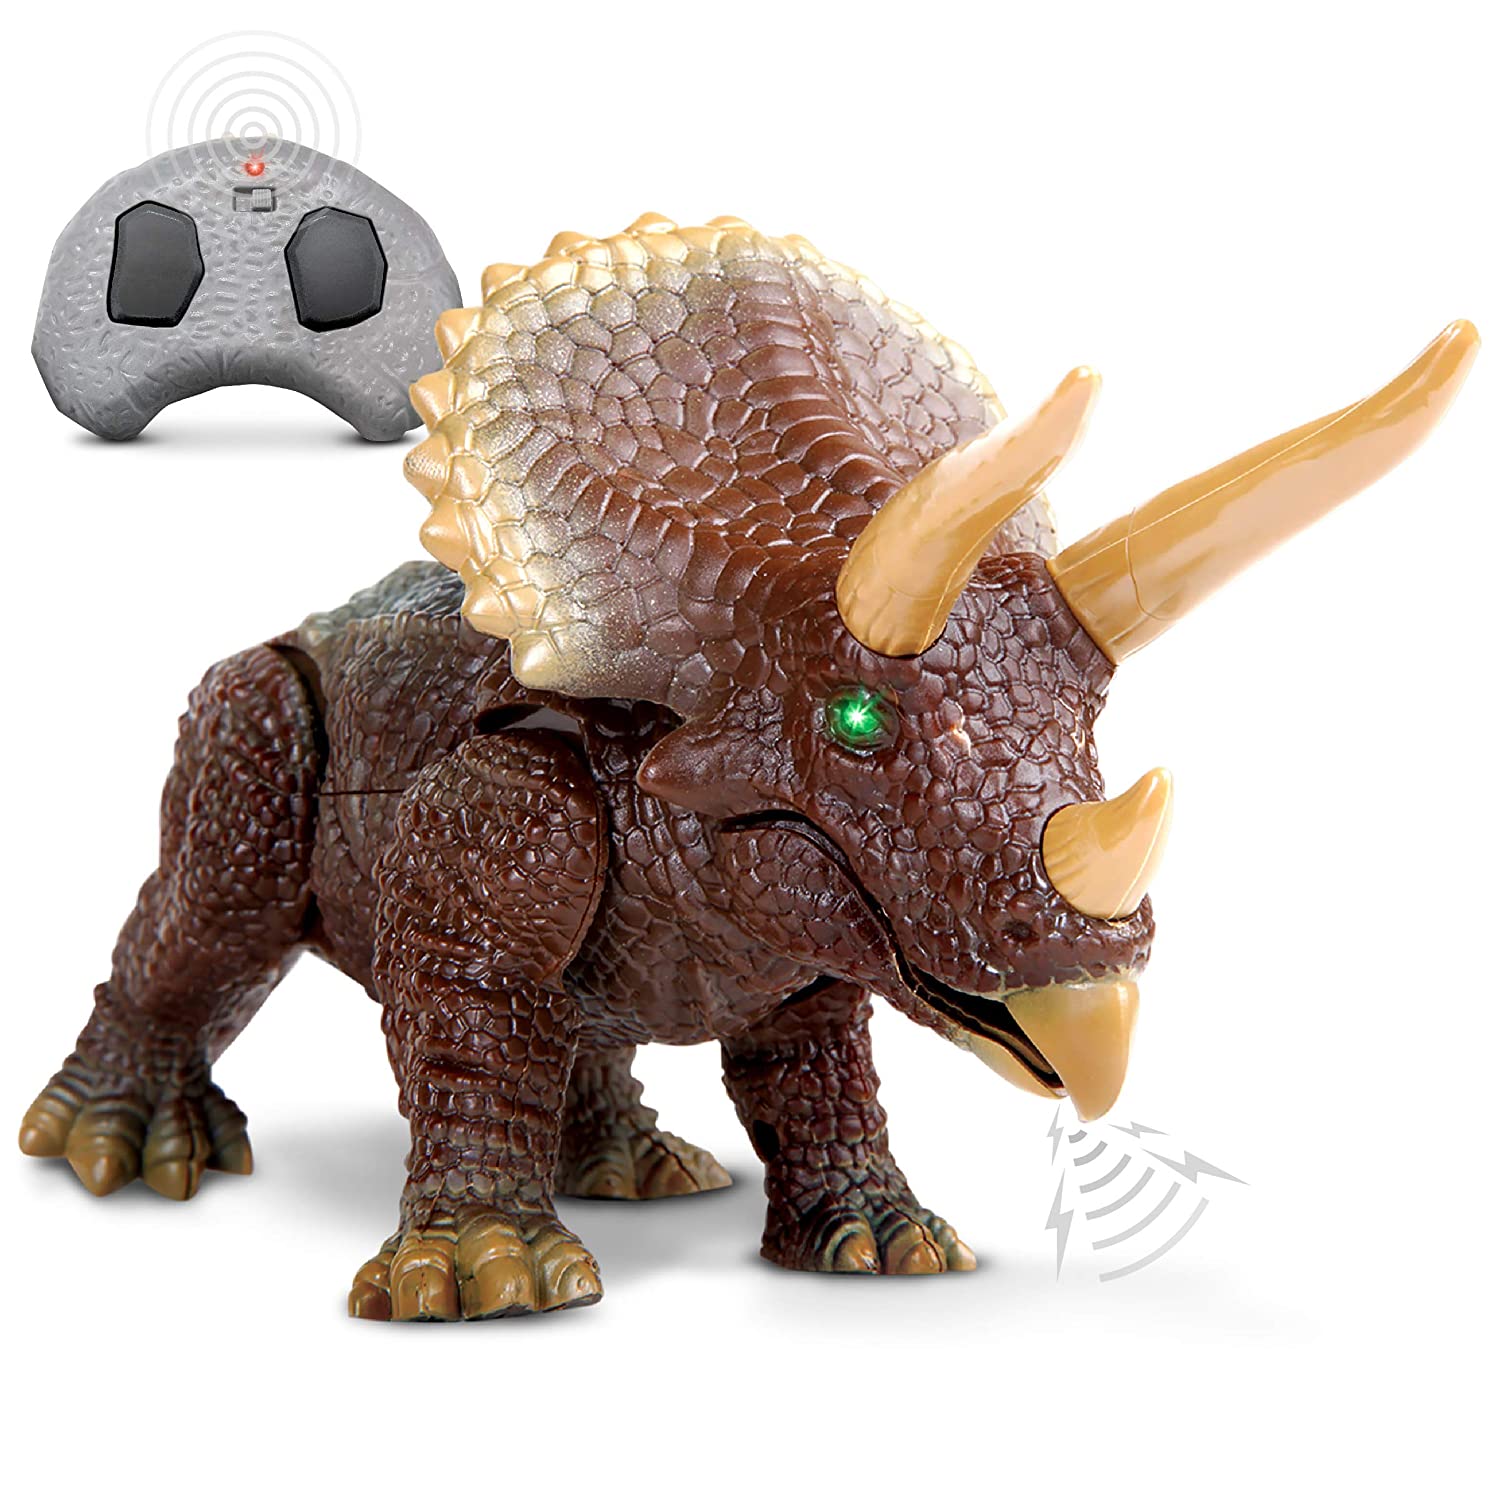 Top 7 Best Robot Dinosaur Toys Reviews in 2023 2